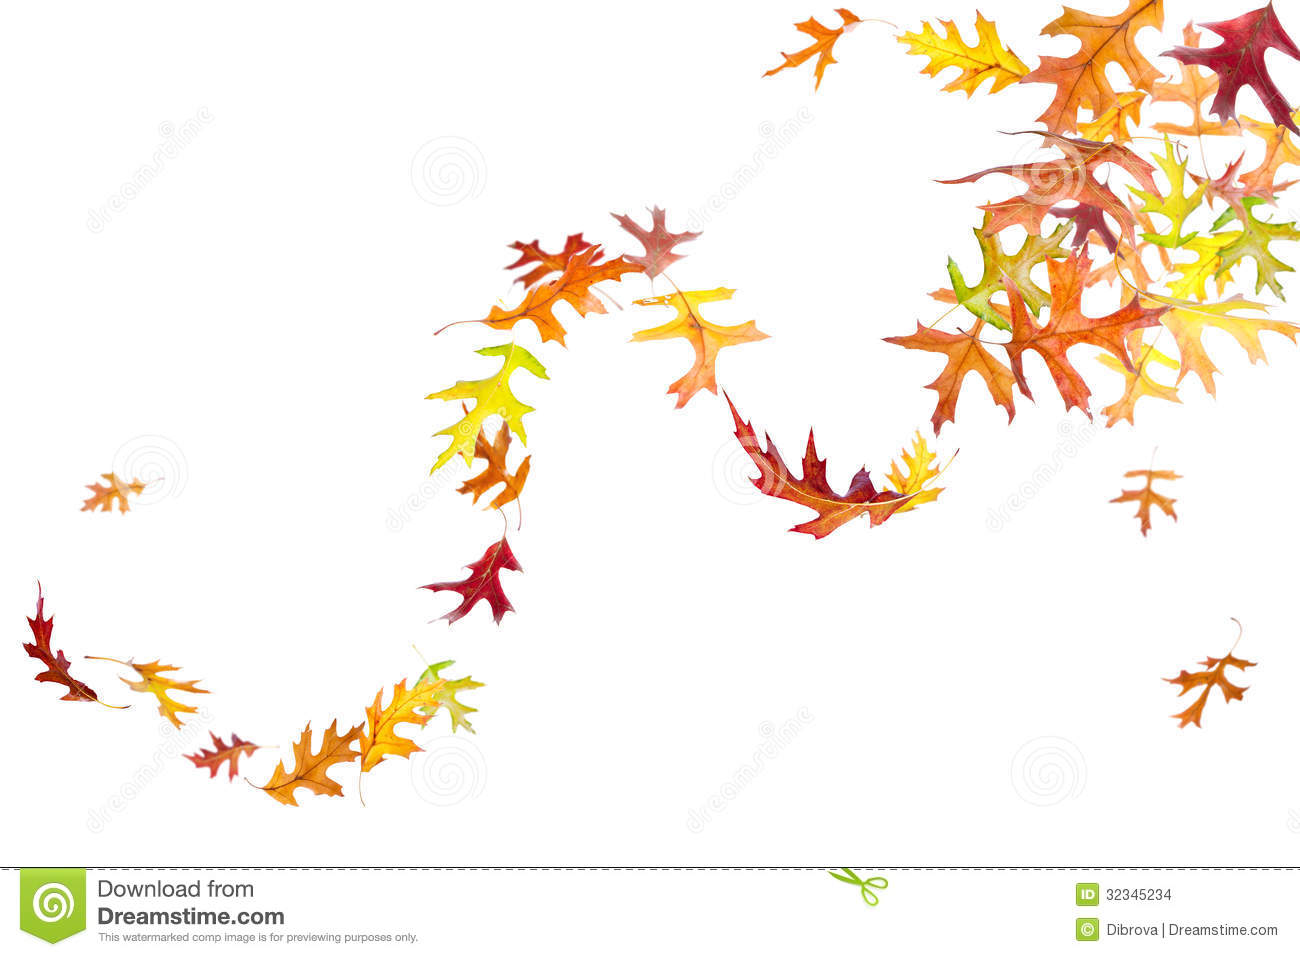 Swirl Of Falling And Spinning Autumn Leaves Isolated On White